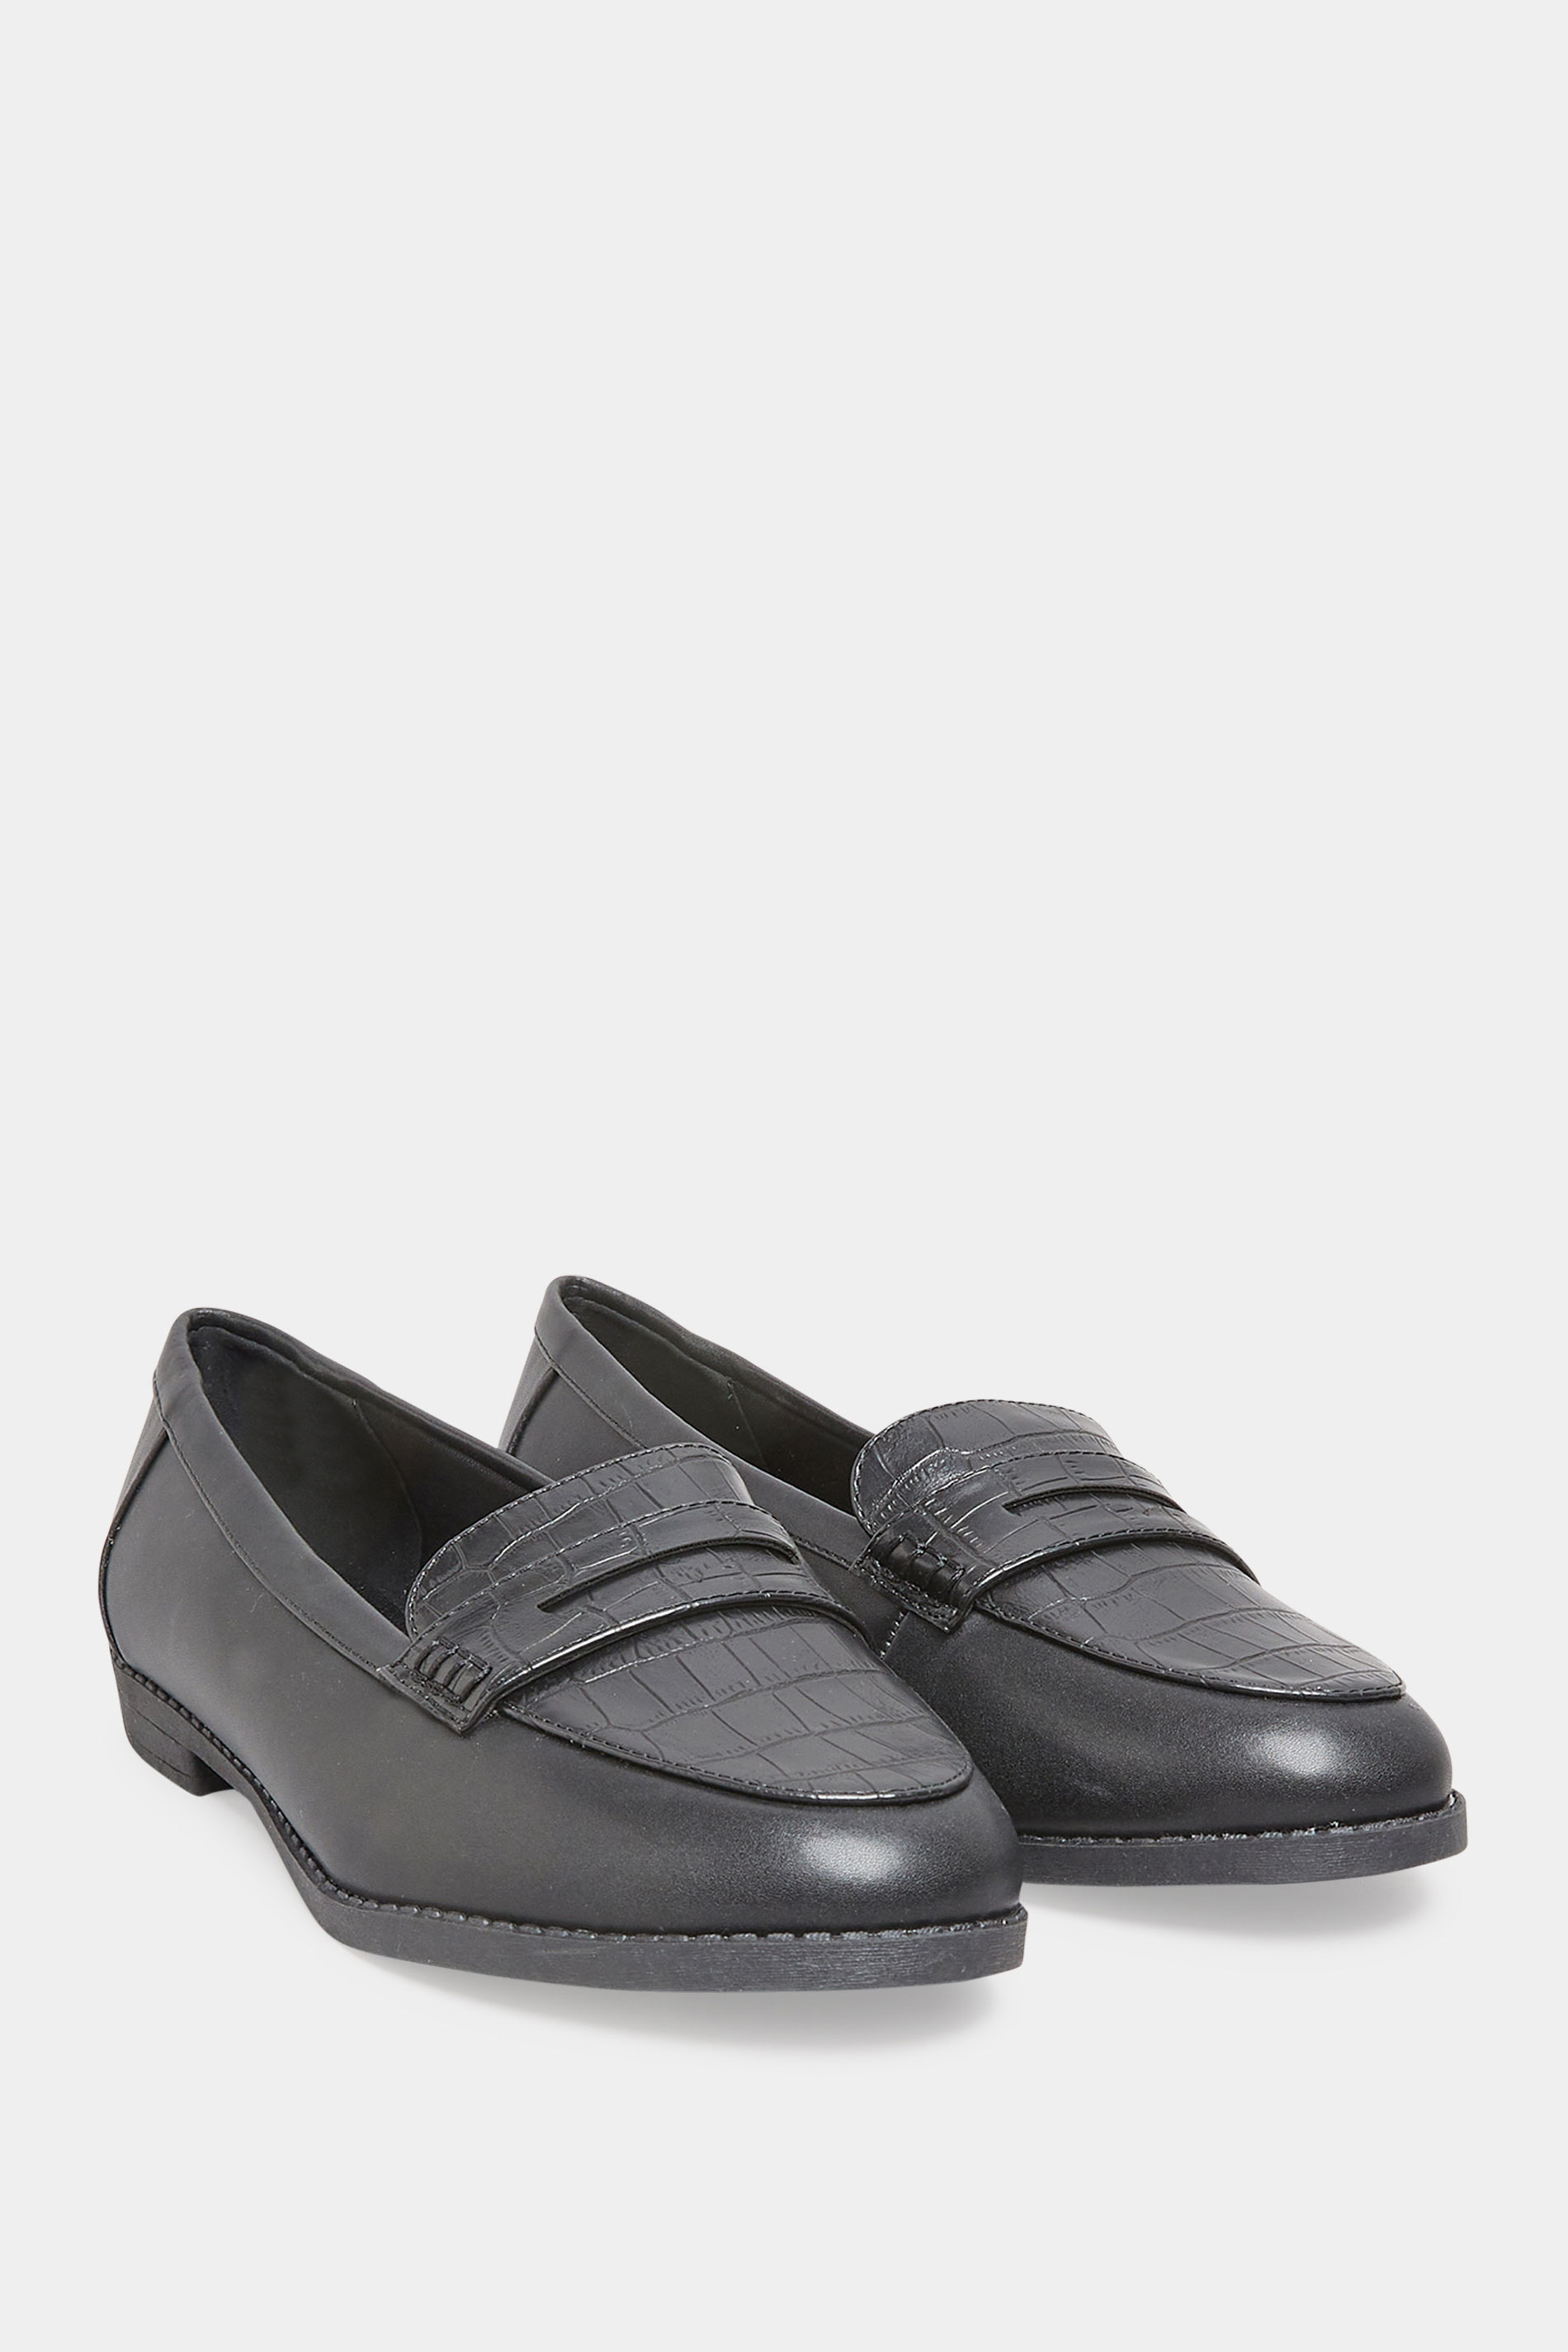 Black Croc Loafers In Extra Wide Fit | Yours Clothing 2